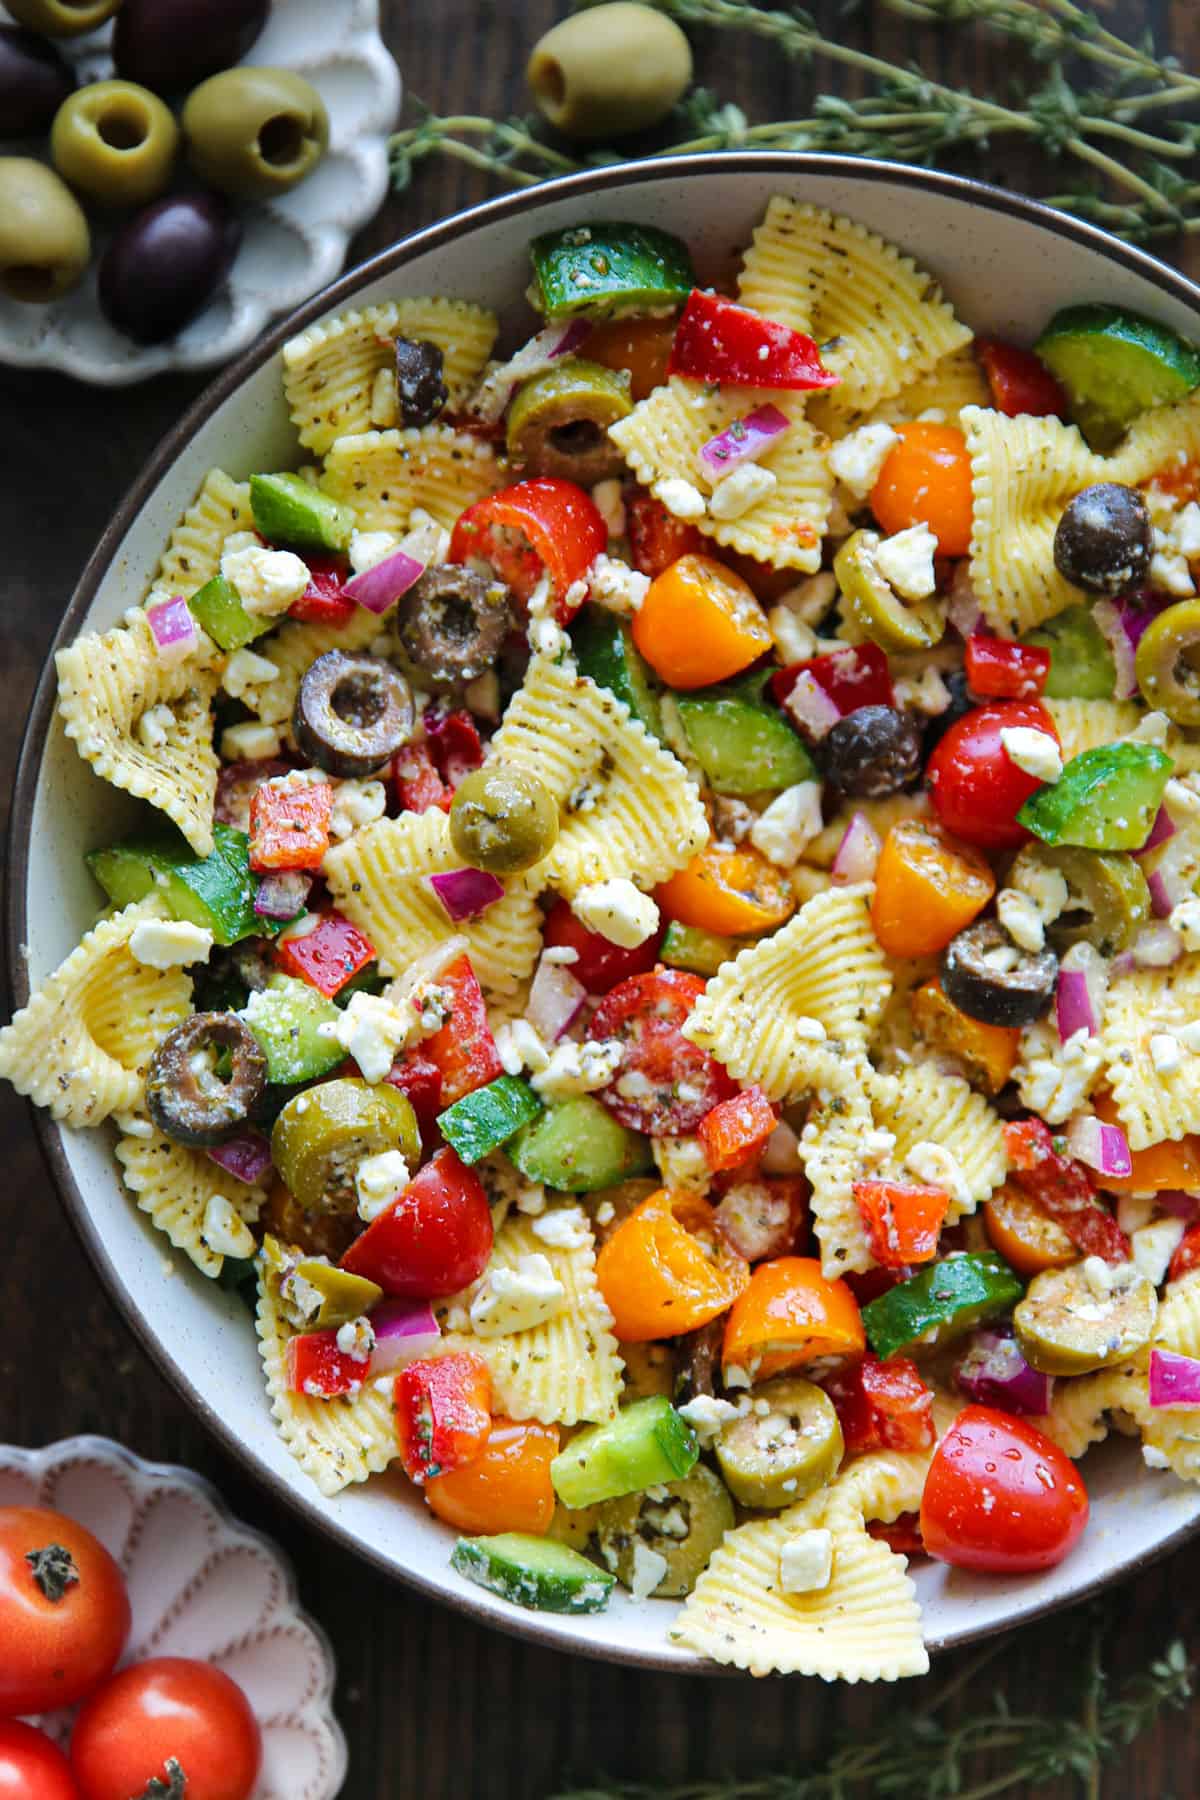 Greek pasta salad with tomatoes, cucumber, bell pepper, olives, red onions, and feta cheese - in a white bowl.